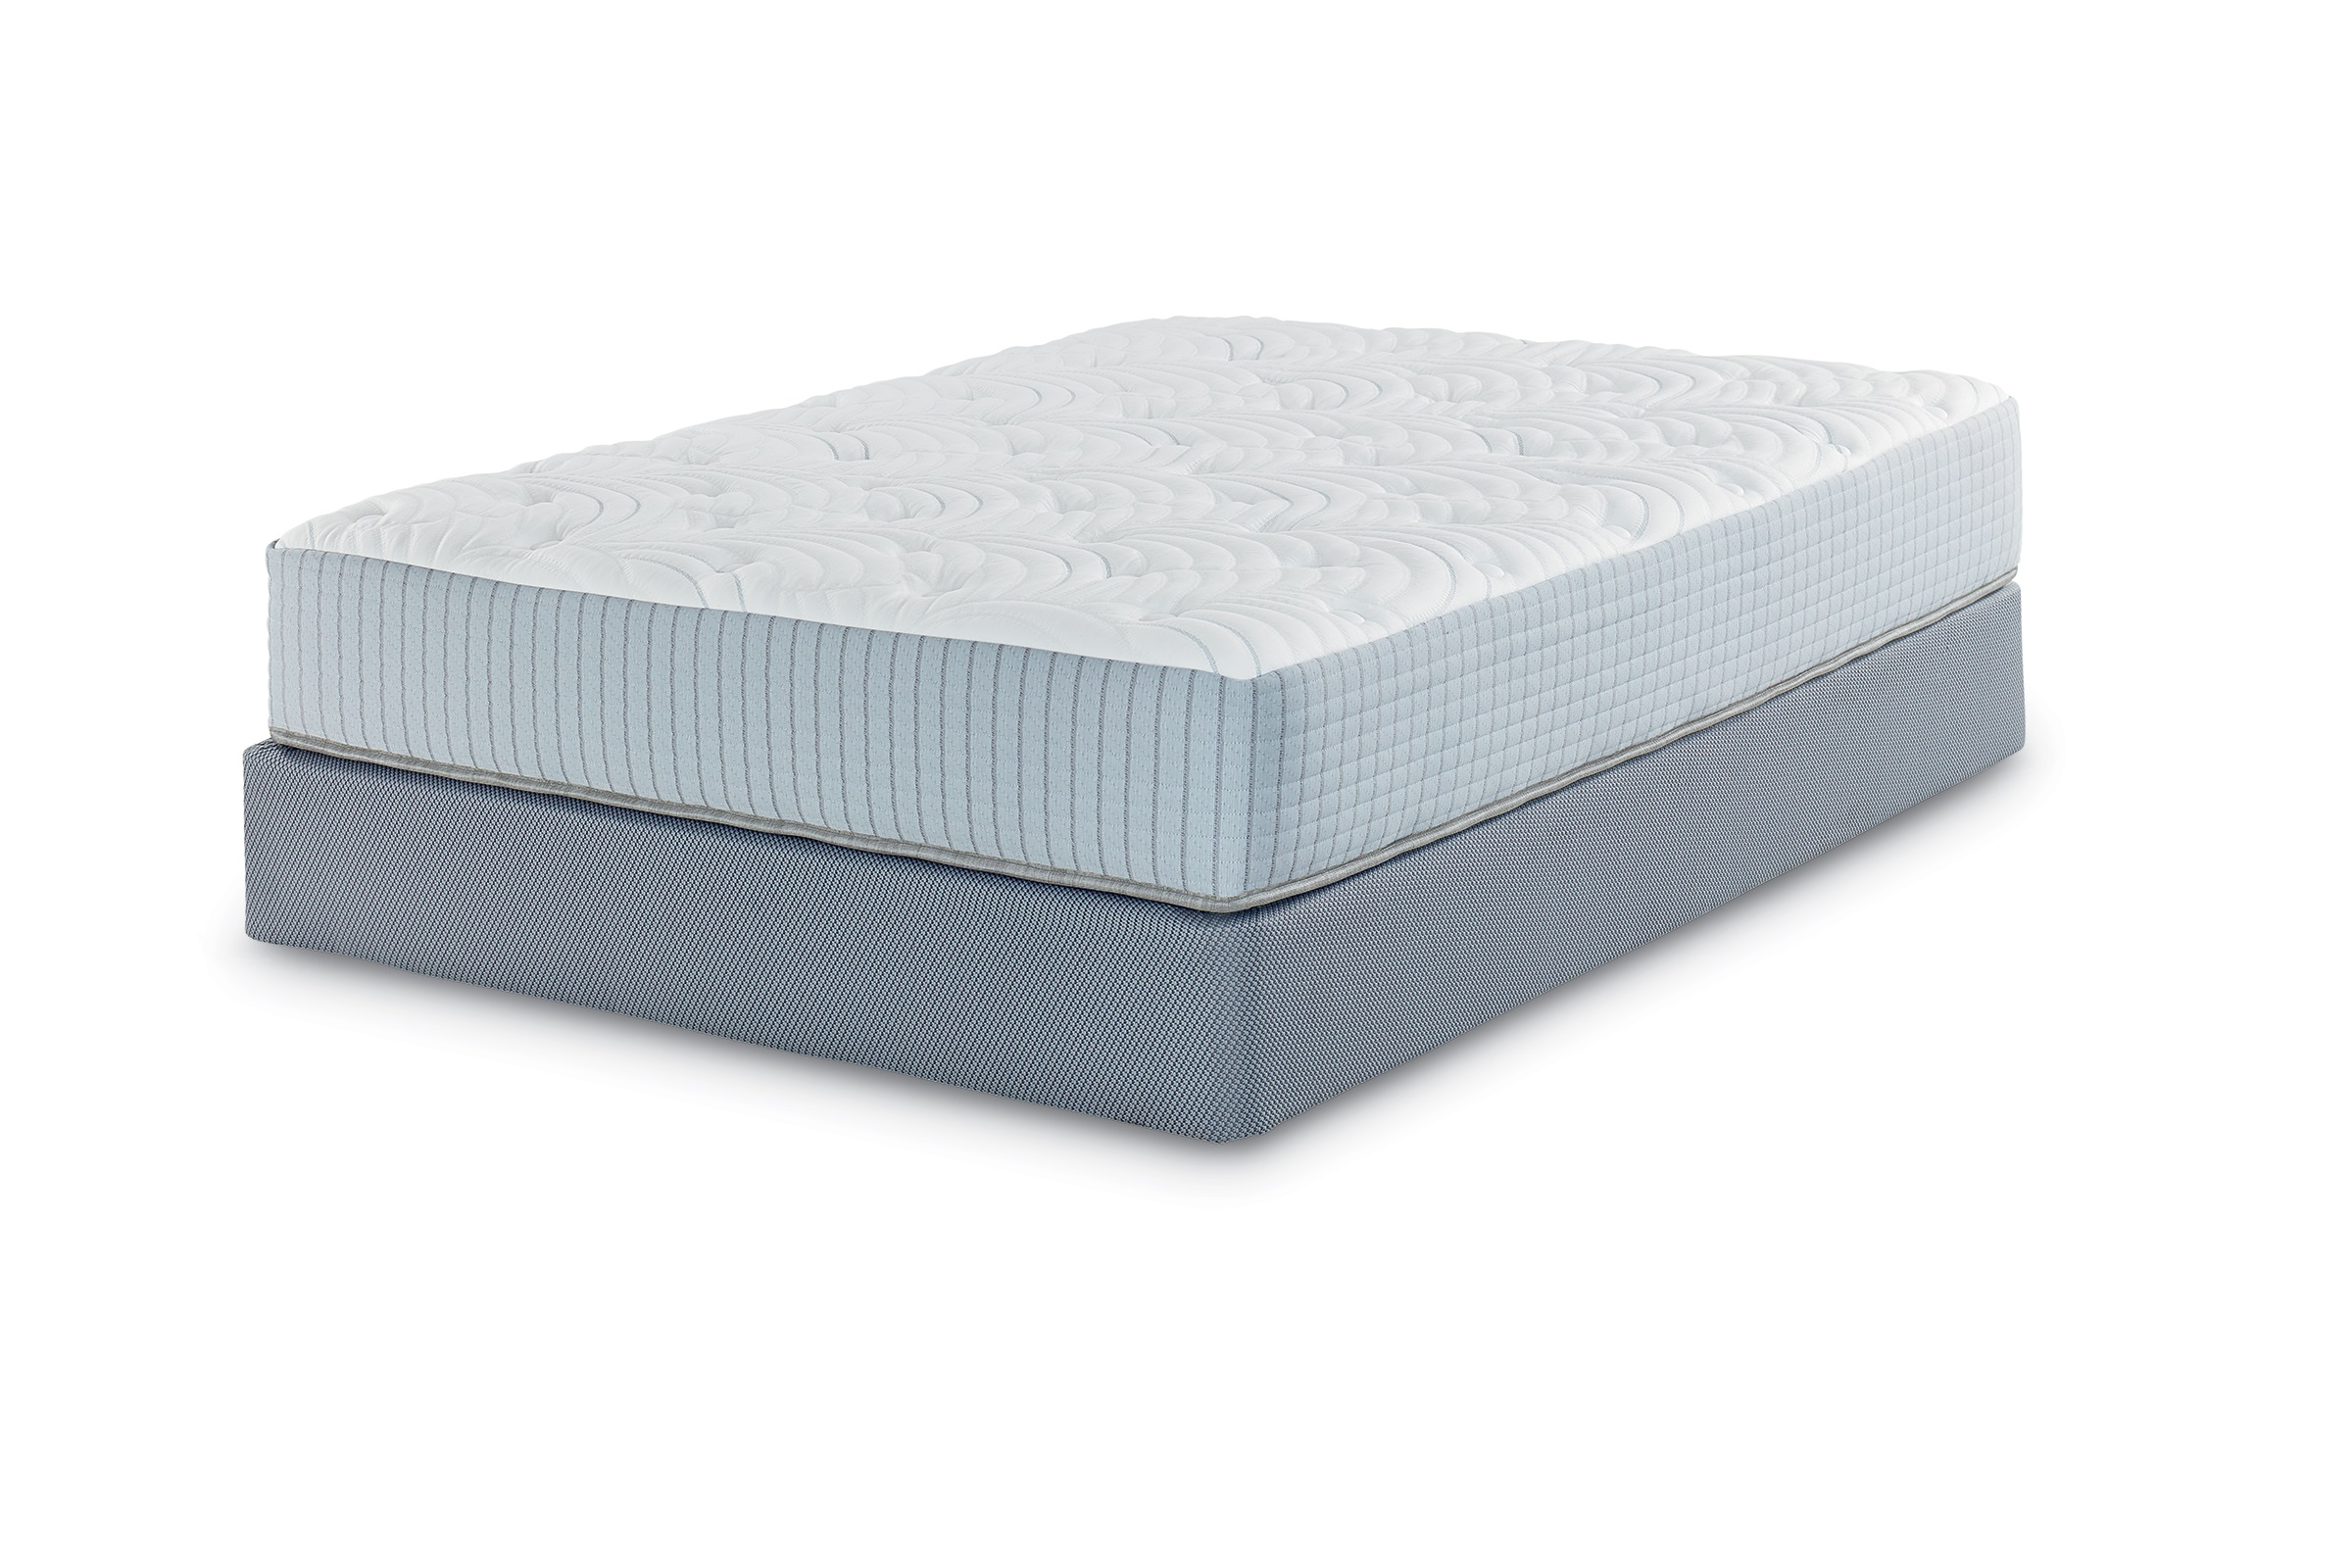 What’s The Best Mattress For Your Age & Stage Of Life?